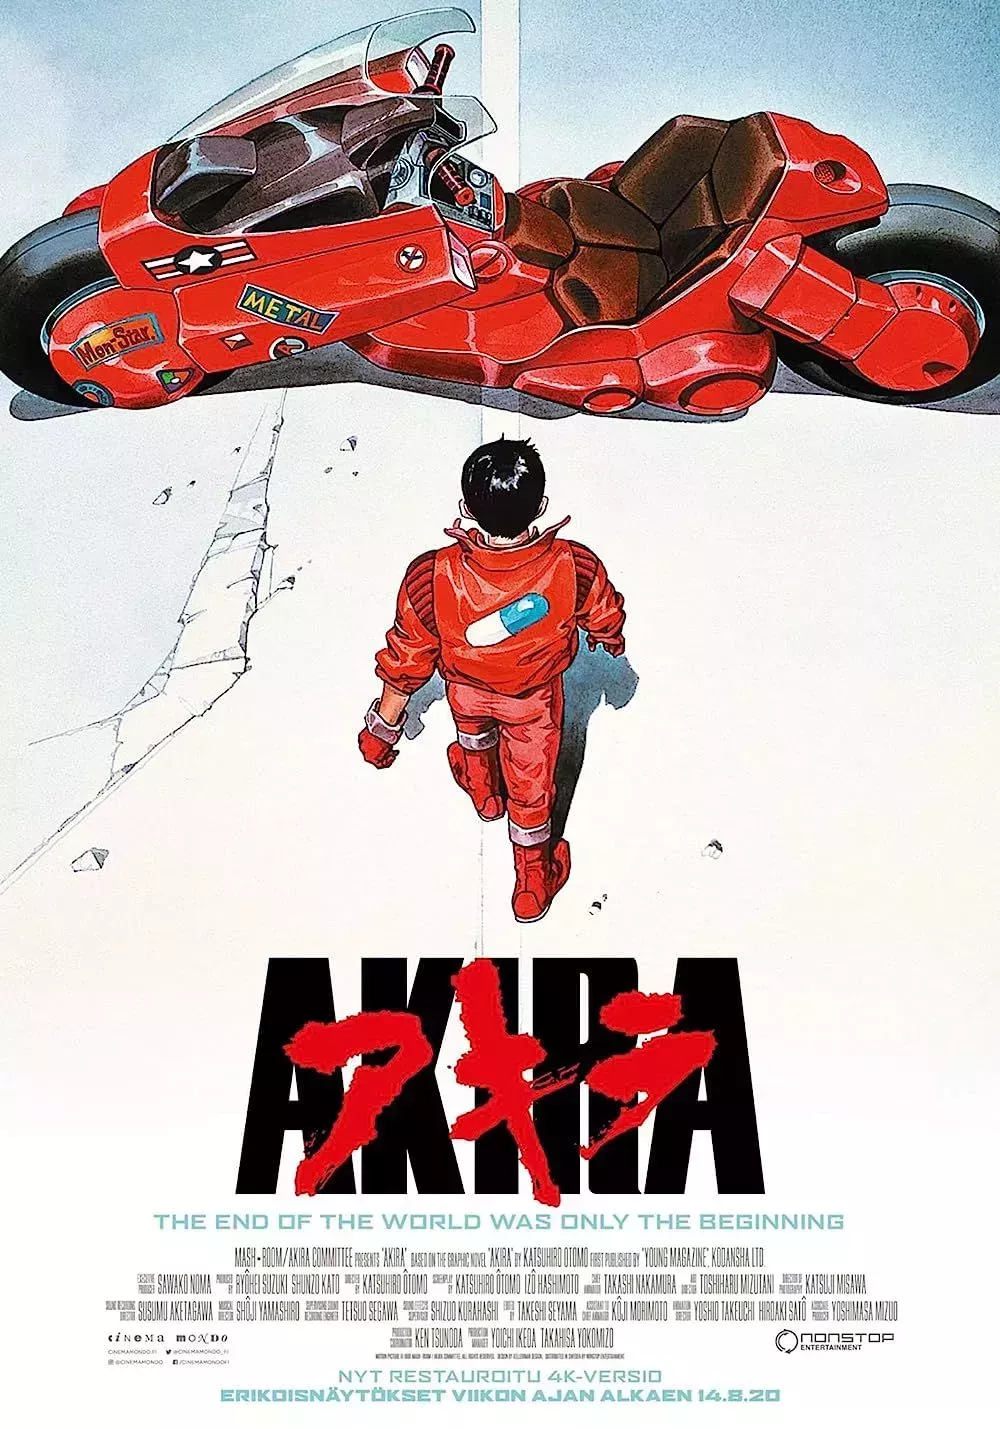 Akira walks toward a red motorcycle on the cover of the Akira (1988) poster